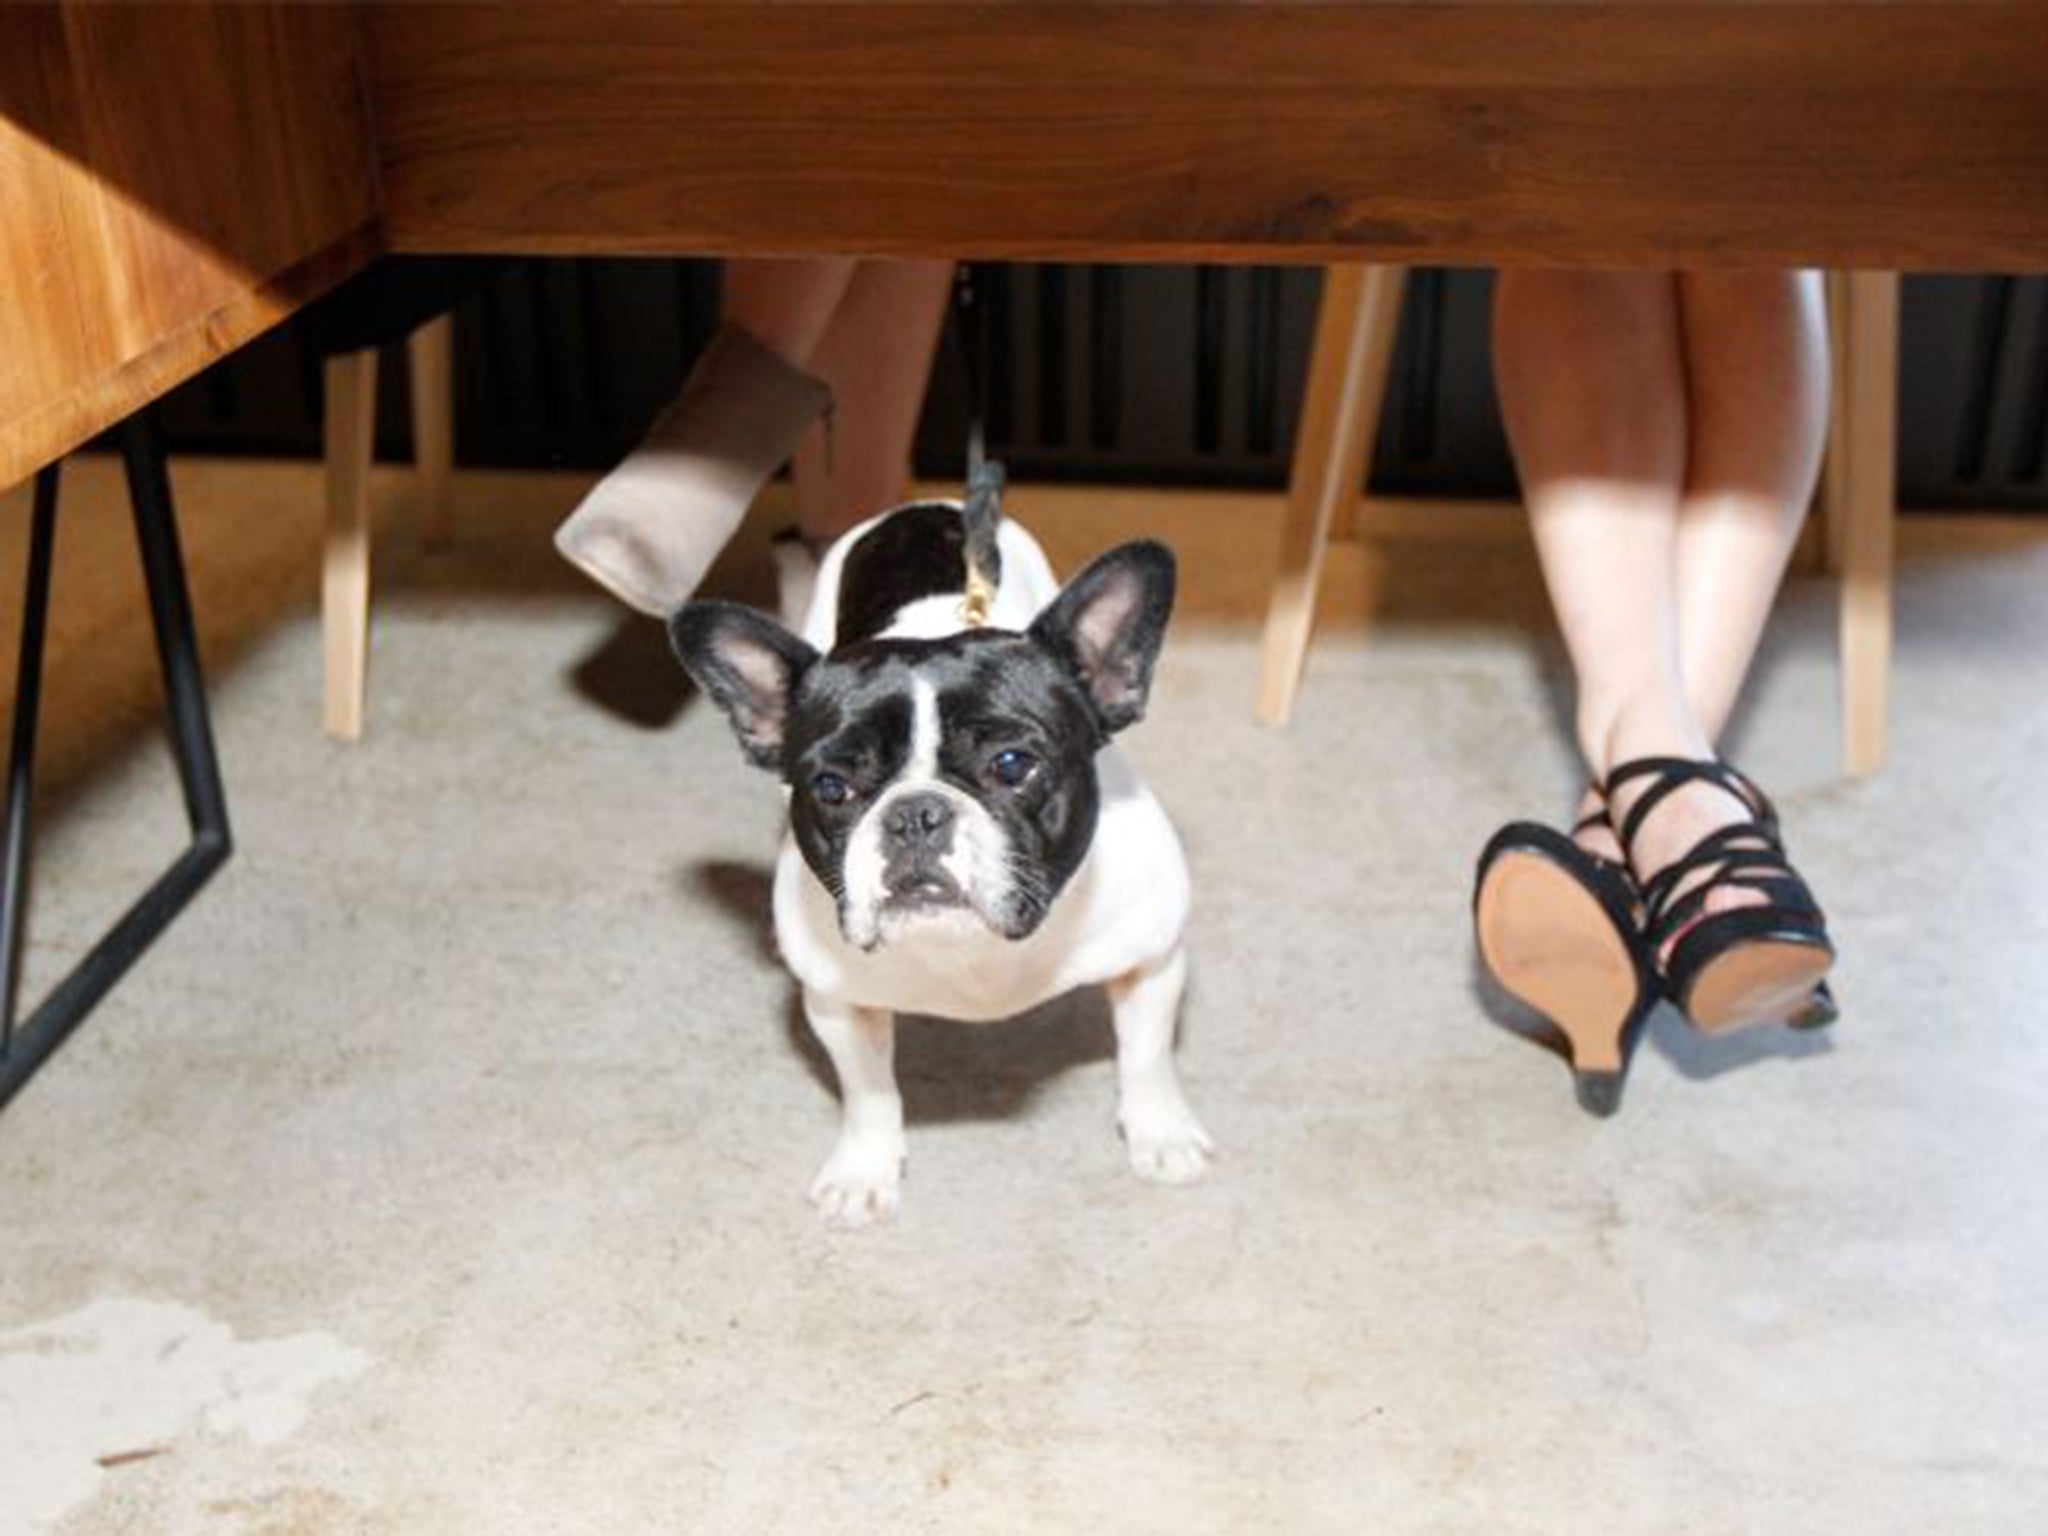 Working like a dog: an employee’s French bulldog hangs out in the office of the magazine ‘Wired’